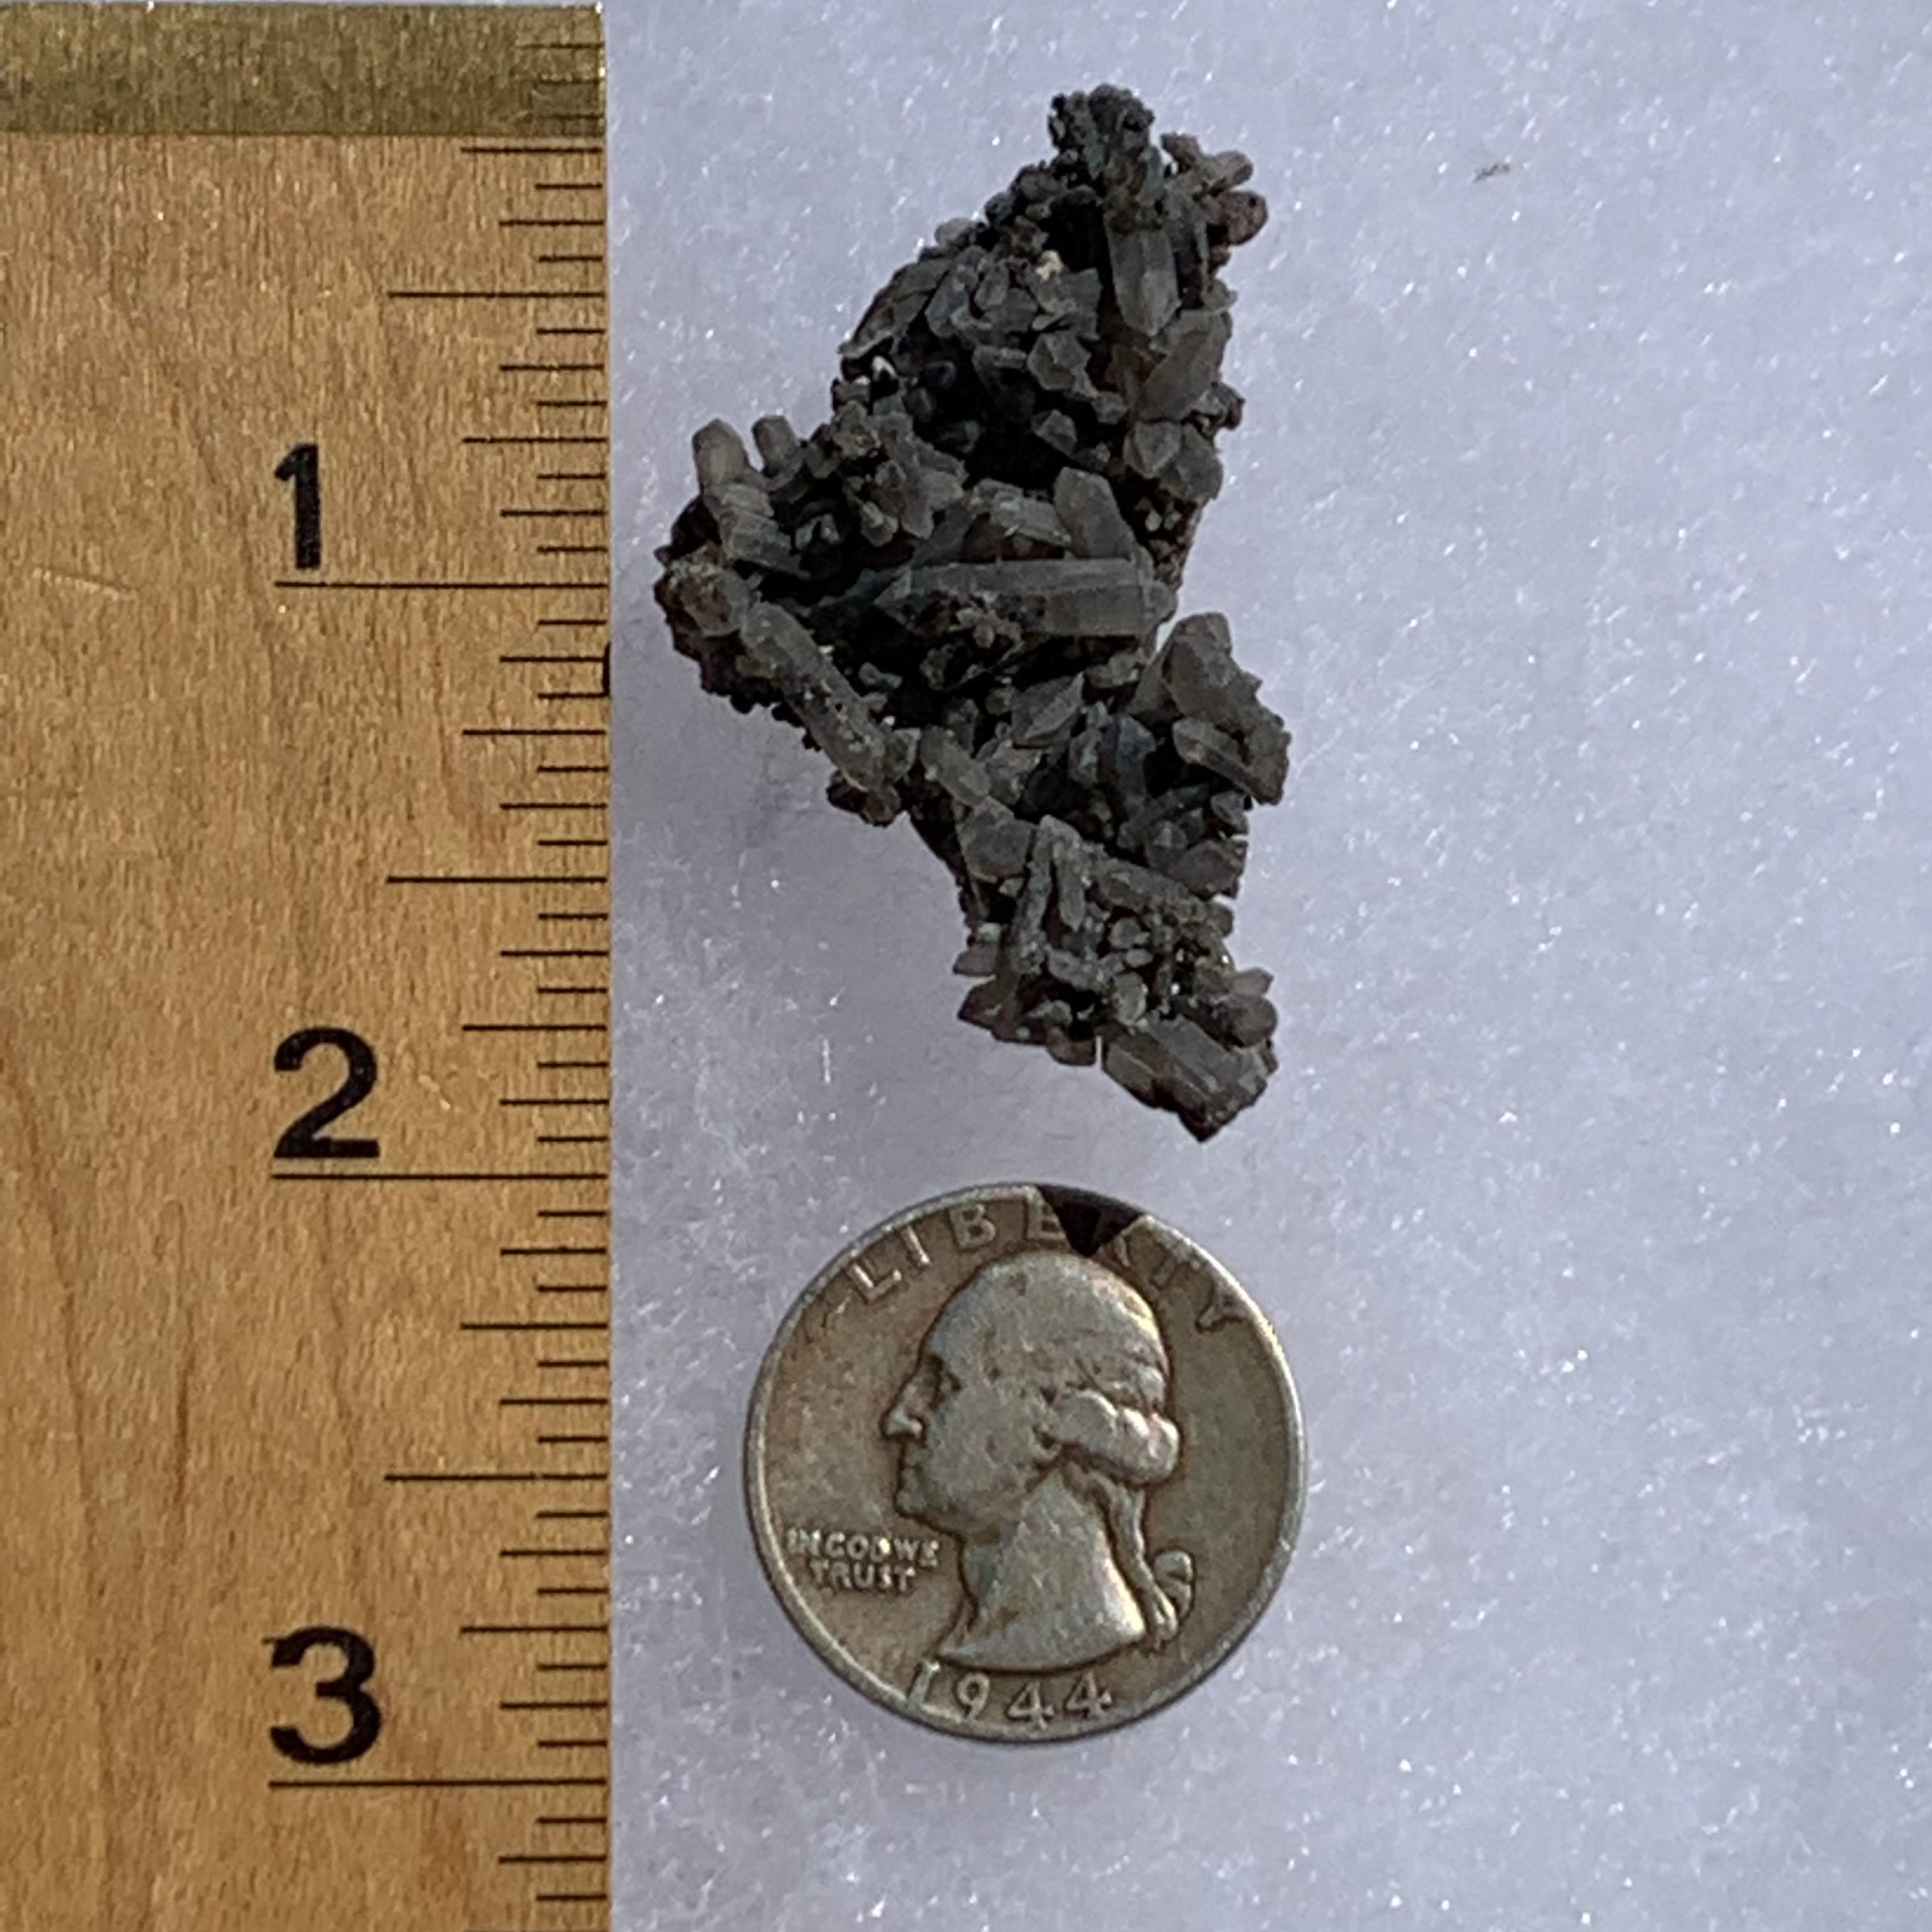 tiny brookite crystals on a smokey quartz point cluster next to a ruler and a quarter for scale